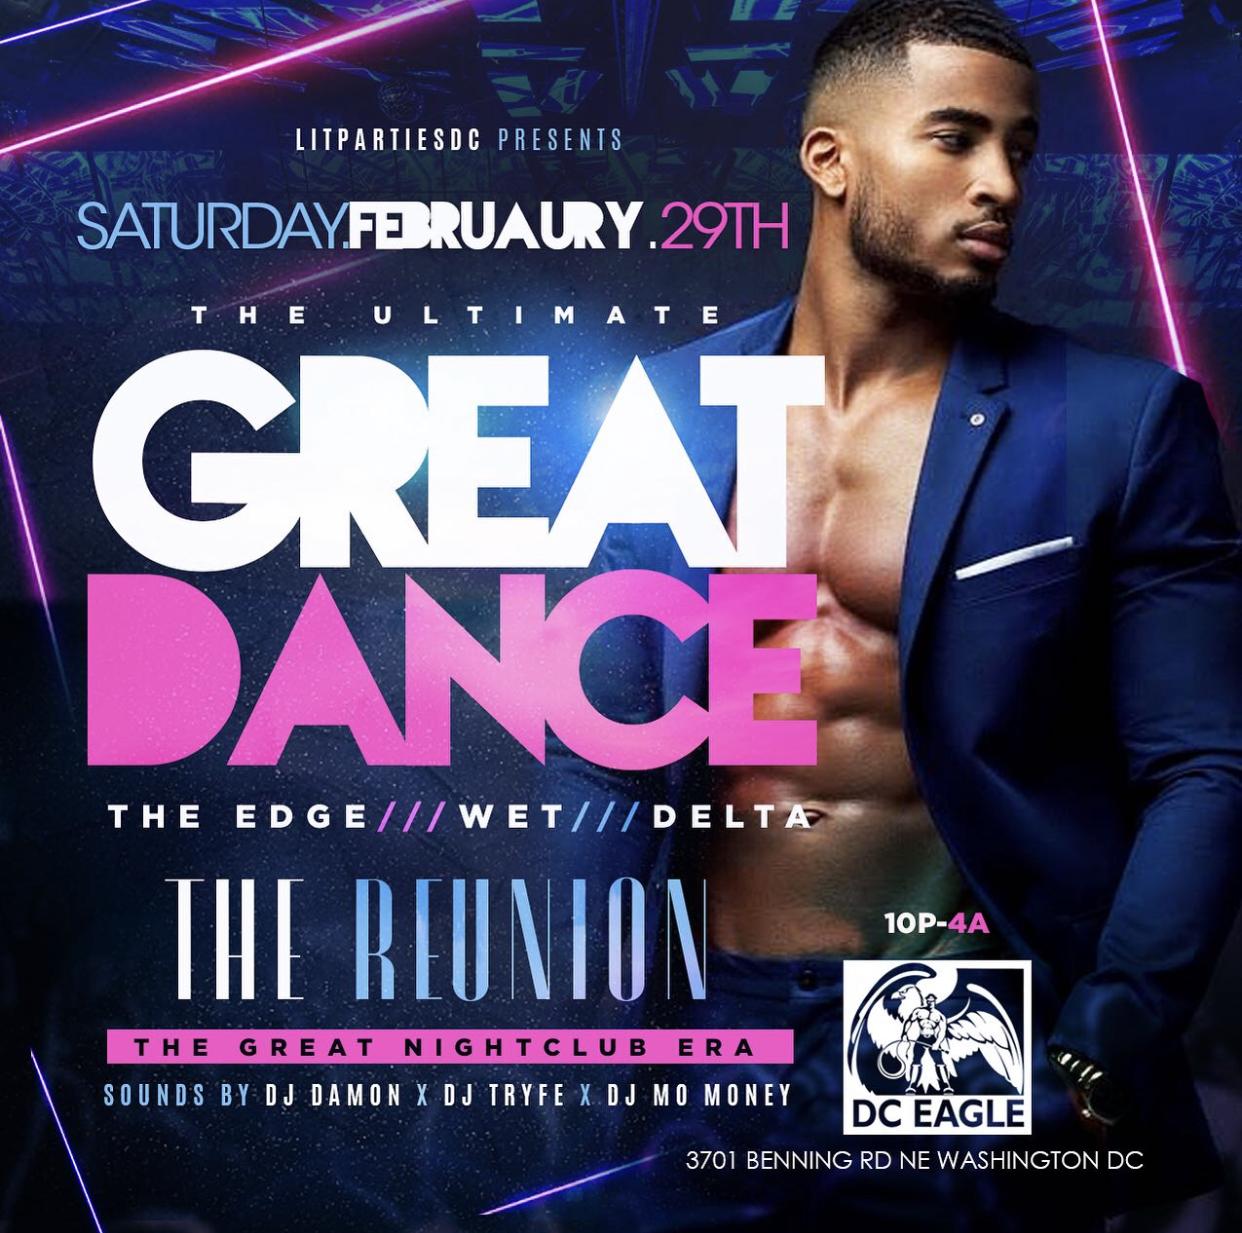  THE ULTIMATE GREAT DANCE, THE EDGE, WET, DELTA, BACHELORS MILL REUNION